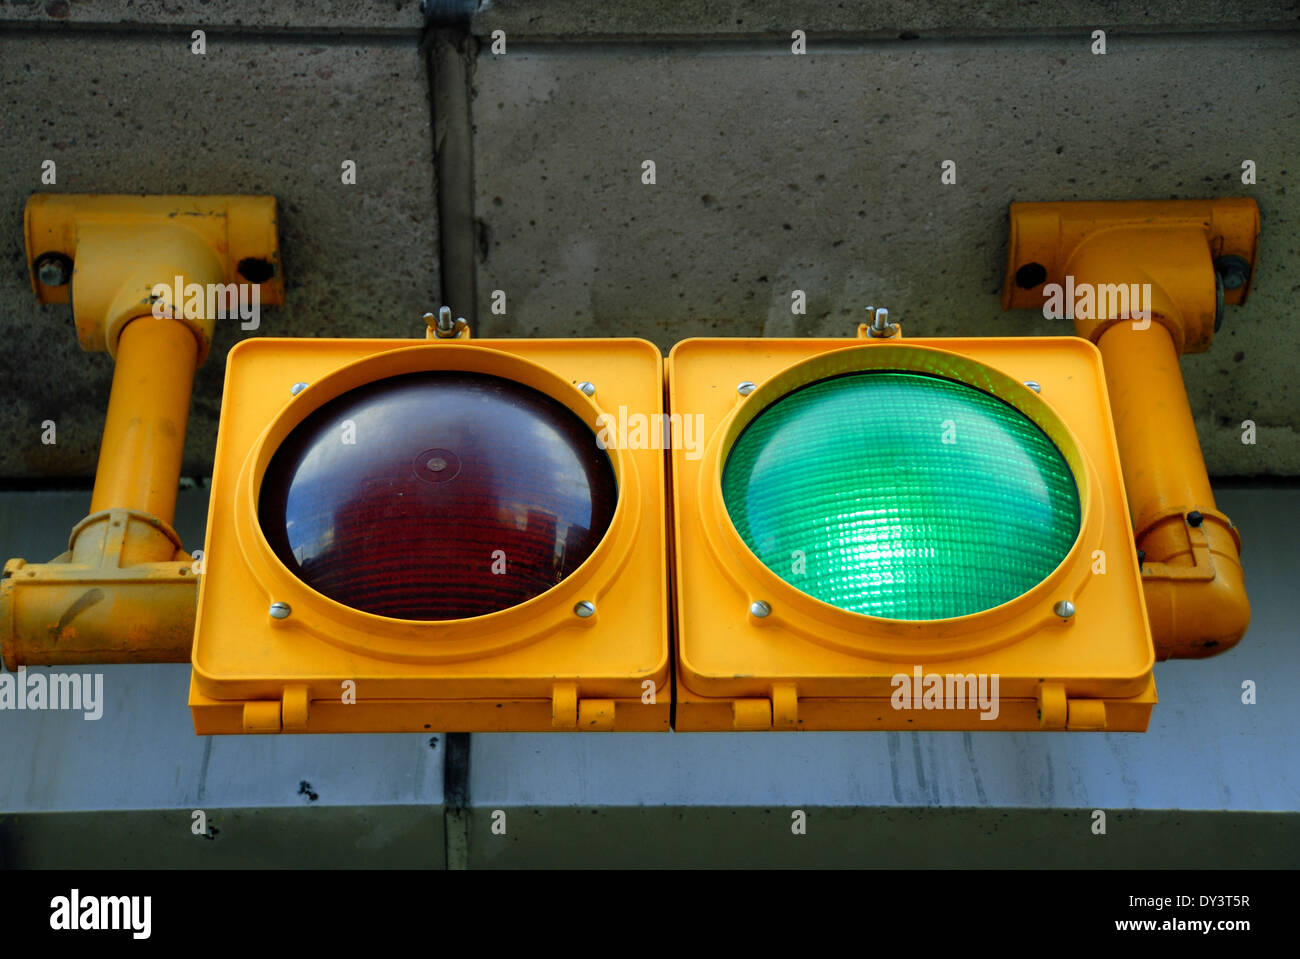 A traffic light at a parking garage is illuminated green, for go. Stock Photo